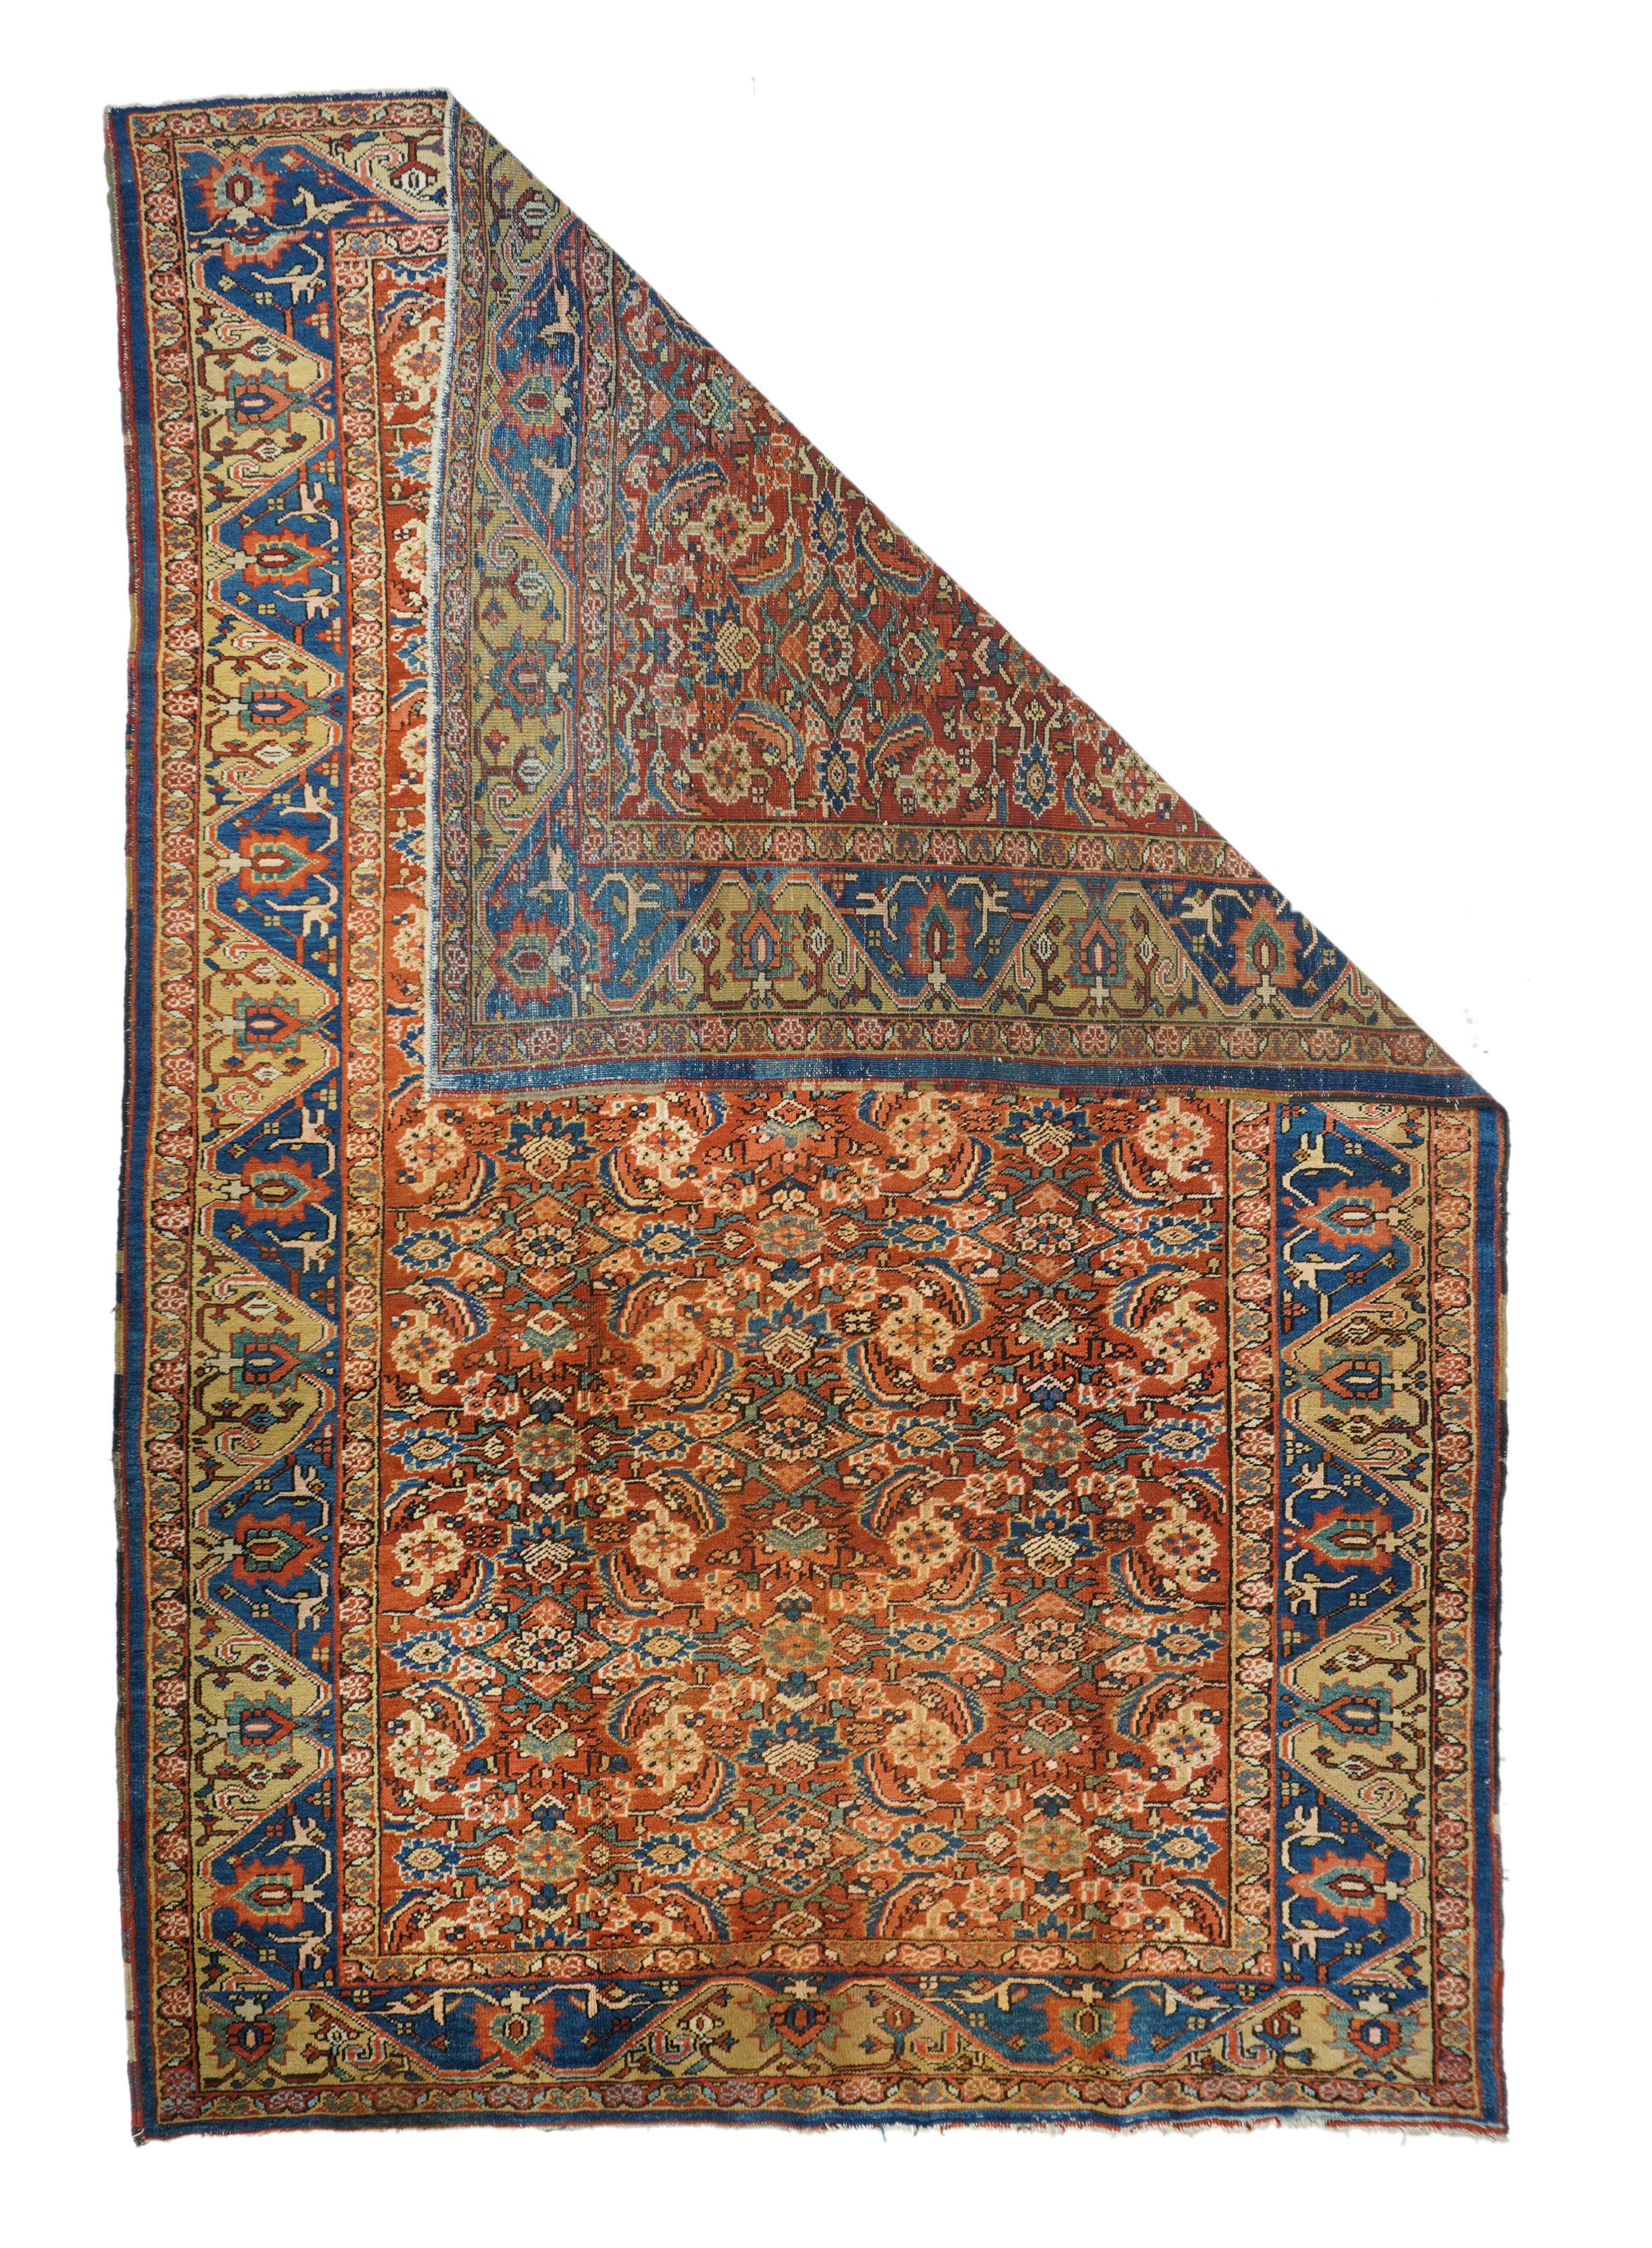 Antique Heriz 7'7'' x 11'8''. The red field uniformly displays an allover four column Herati design of palmettes, rosettes, curved leaves and open lozenges, accented in navy, cream and rust. Straw and mid-blue reciprocal trapezoid border with